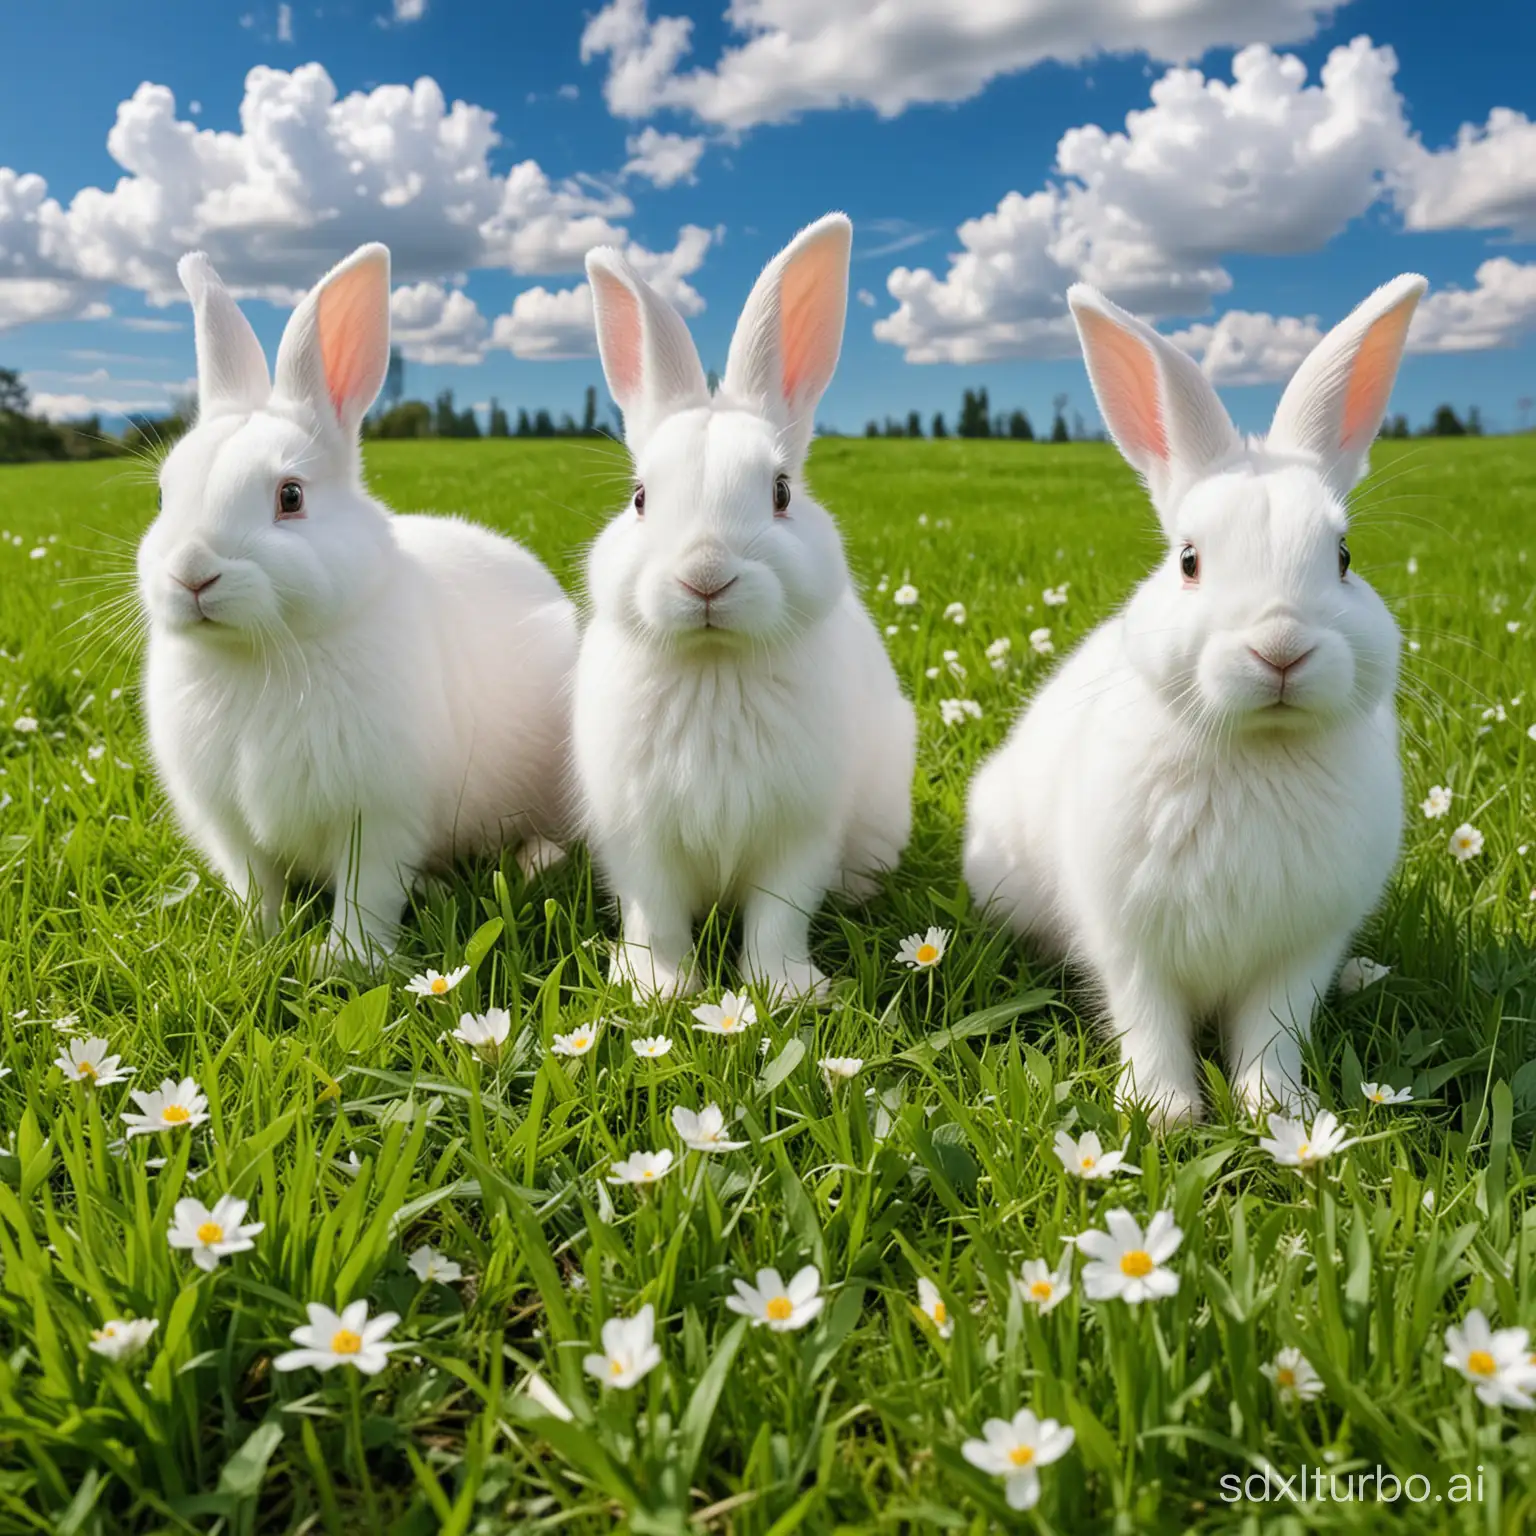 Four-White-Rabbits-Frolicking-in-a-Lush-Meadow-under-a-Blue-Sky